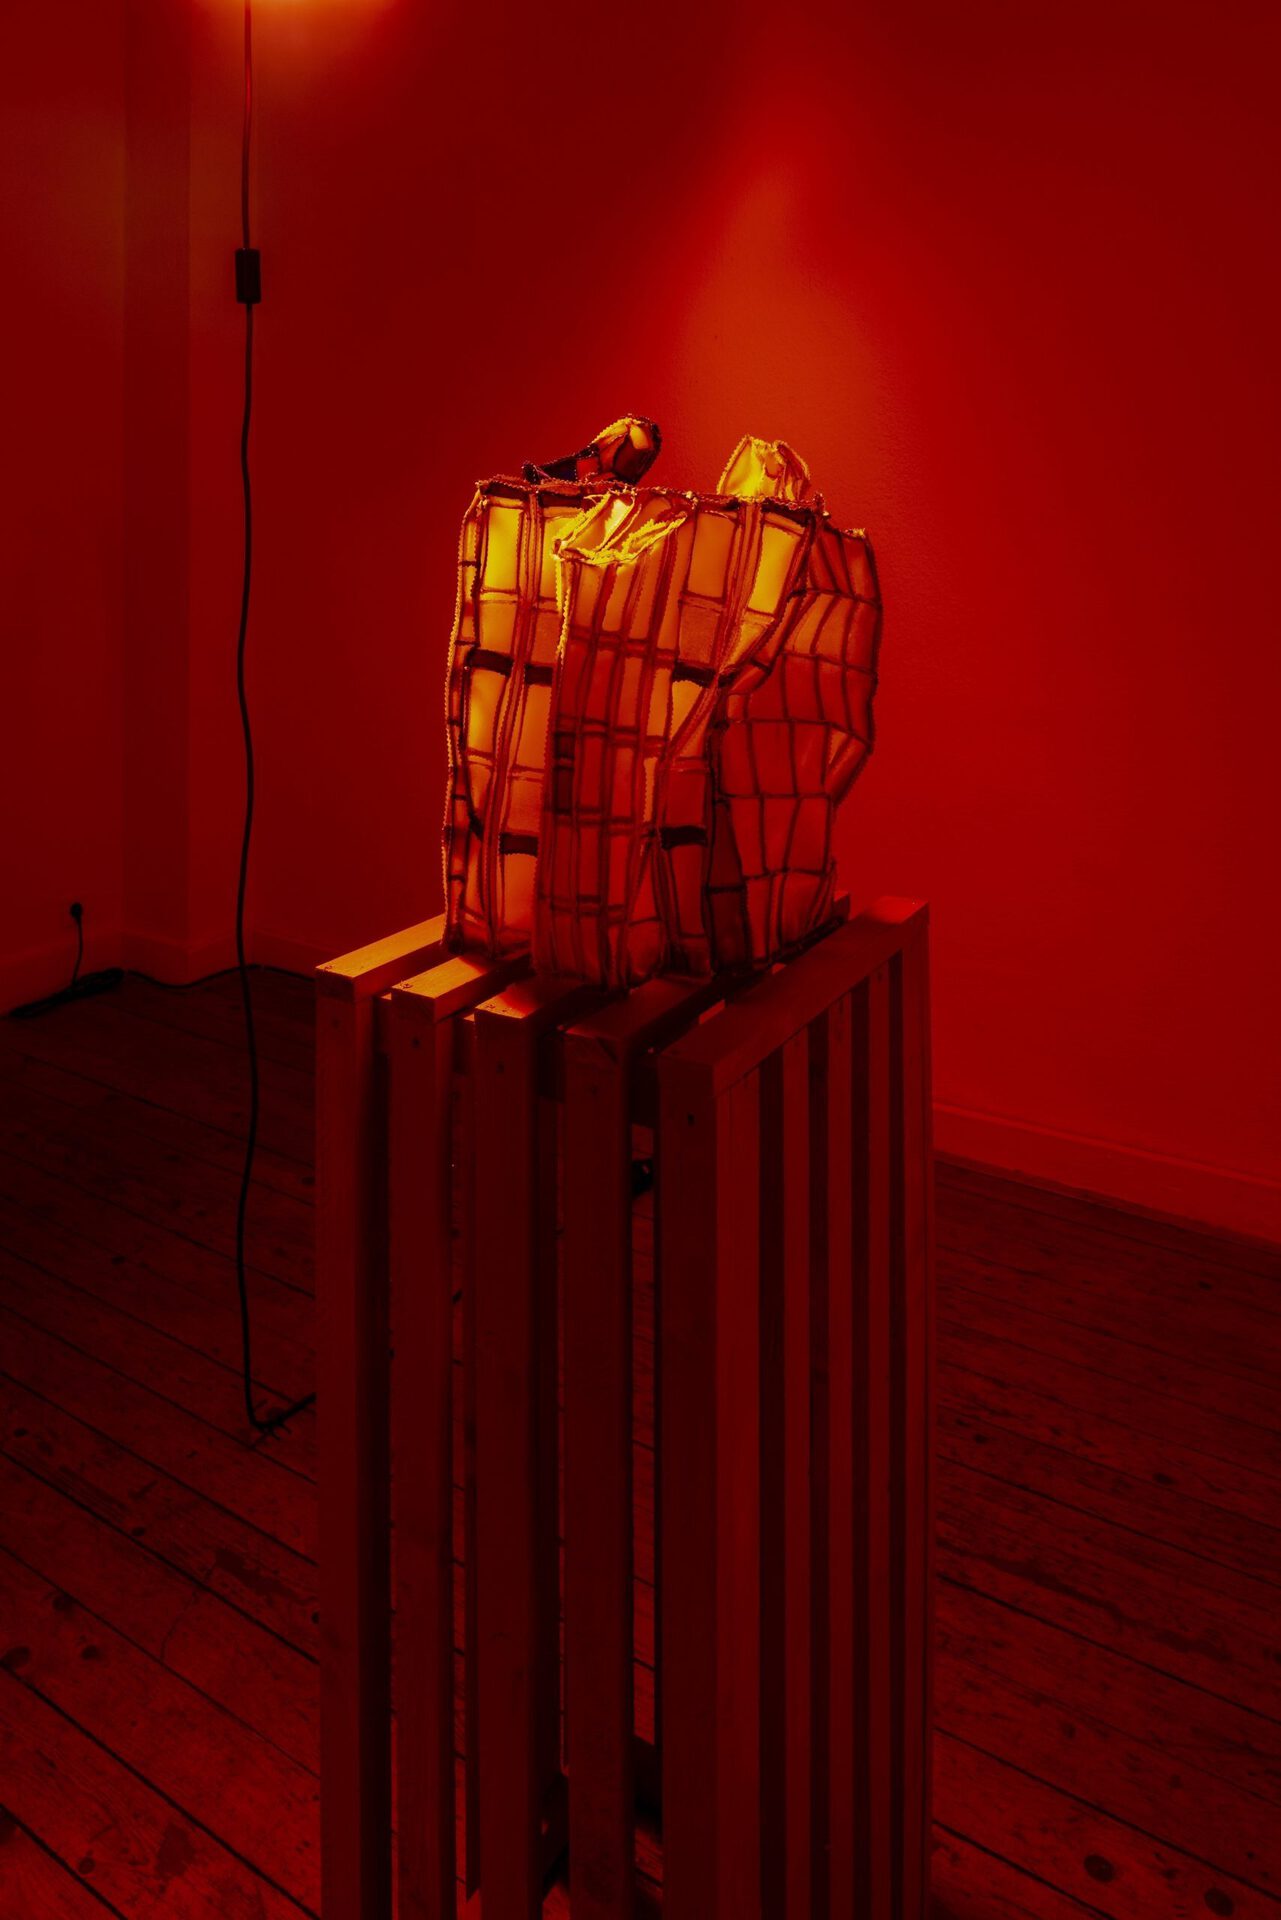 FYNN RIBBECK, LESSON OF THE AIRPLANE, 2021, ANSCHLAG (ATTACK), (LEATHERETTE, YARN, WOOD, 40 X 37 X 38 CM (PEDESTAL 100 X 40 X 100 CM)